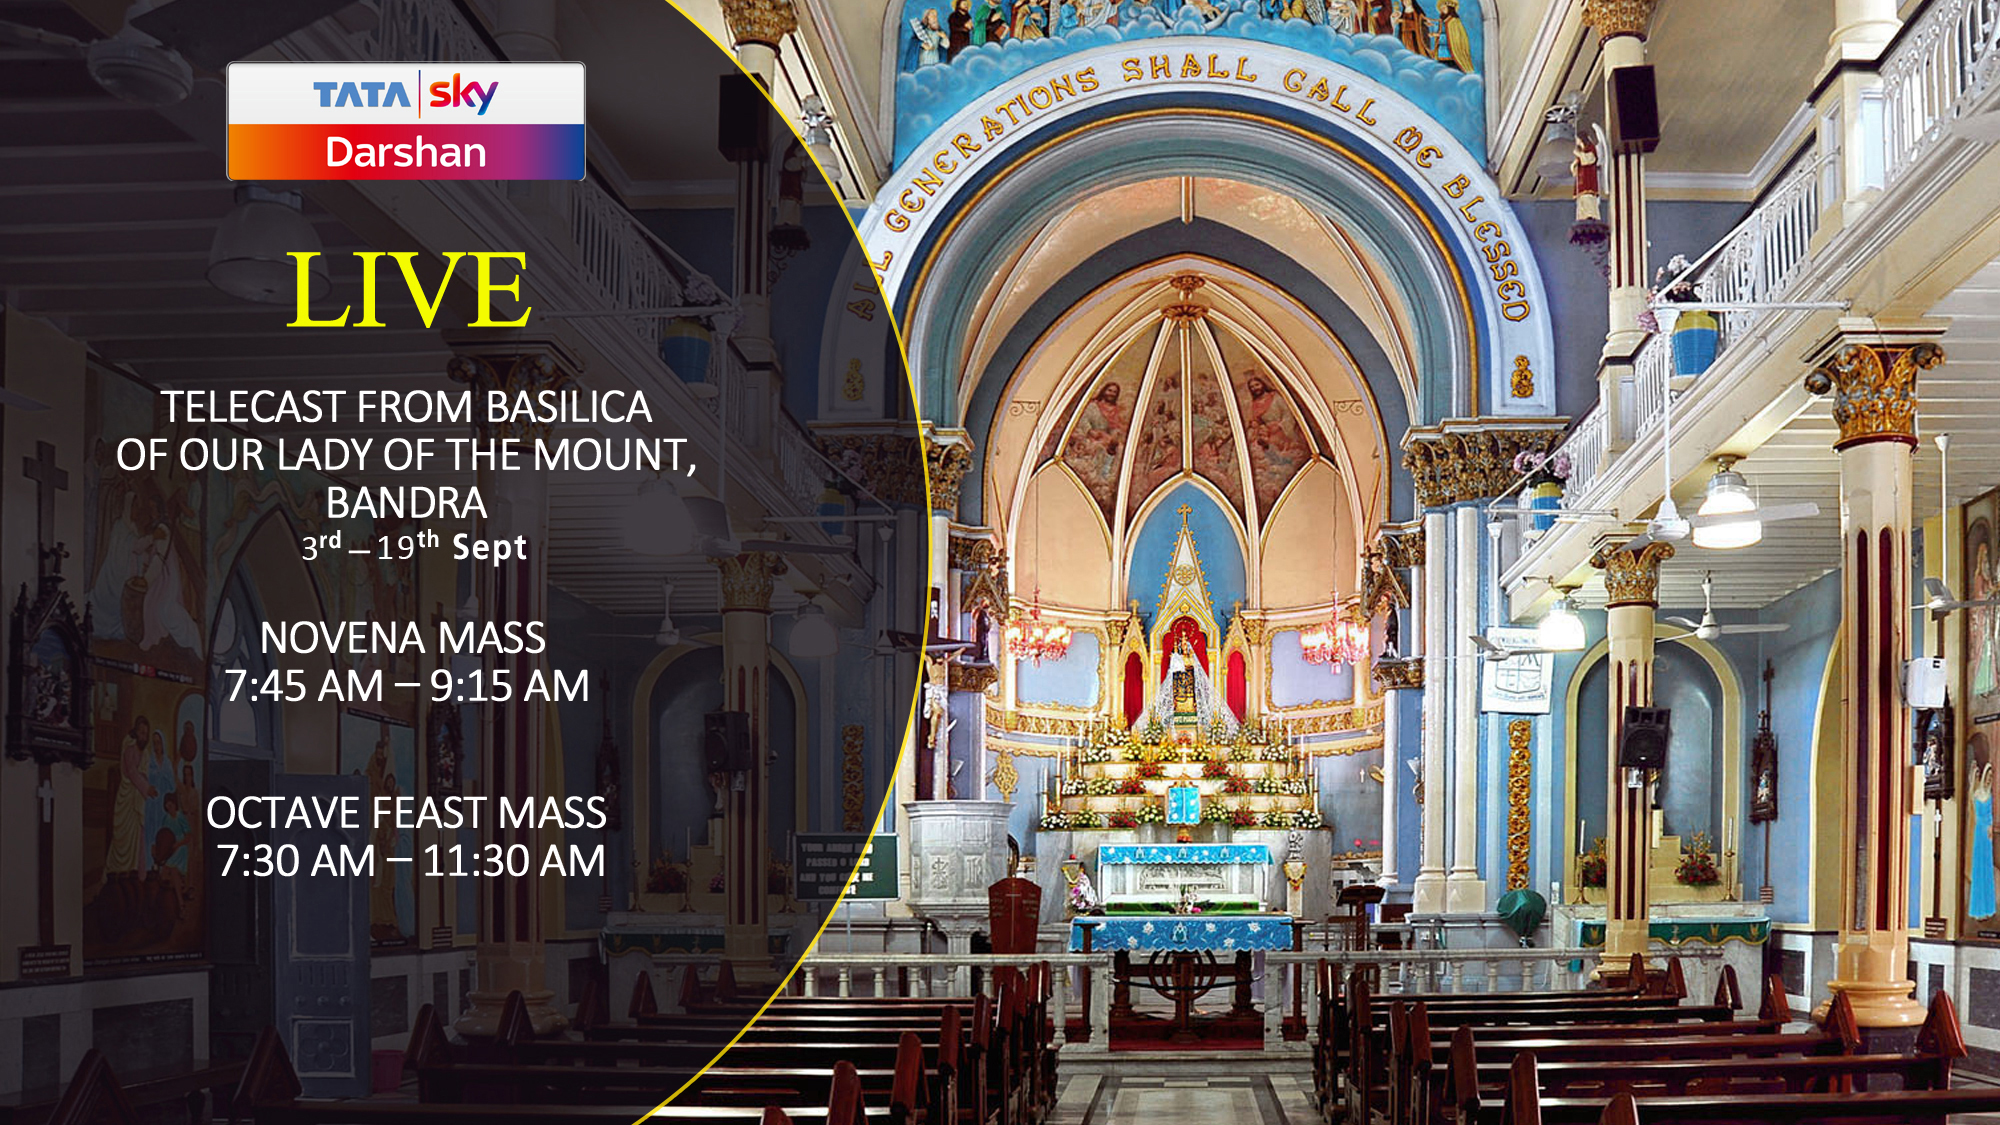 Tata Sky is showcasing live Mass from Basilica of Our Lady of the Mount, Bandra!